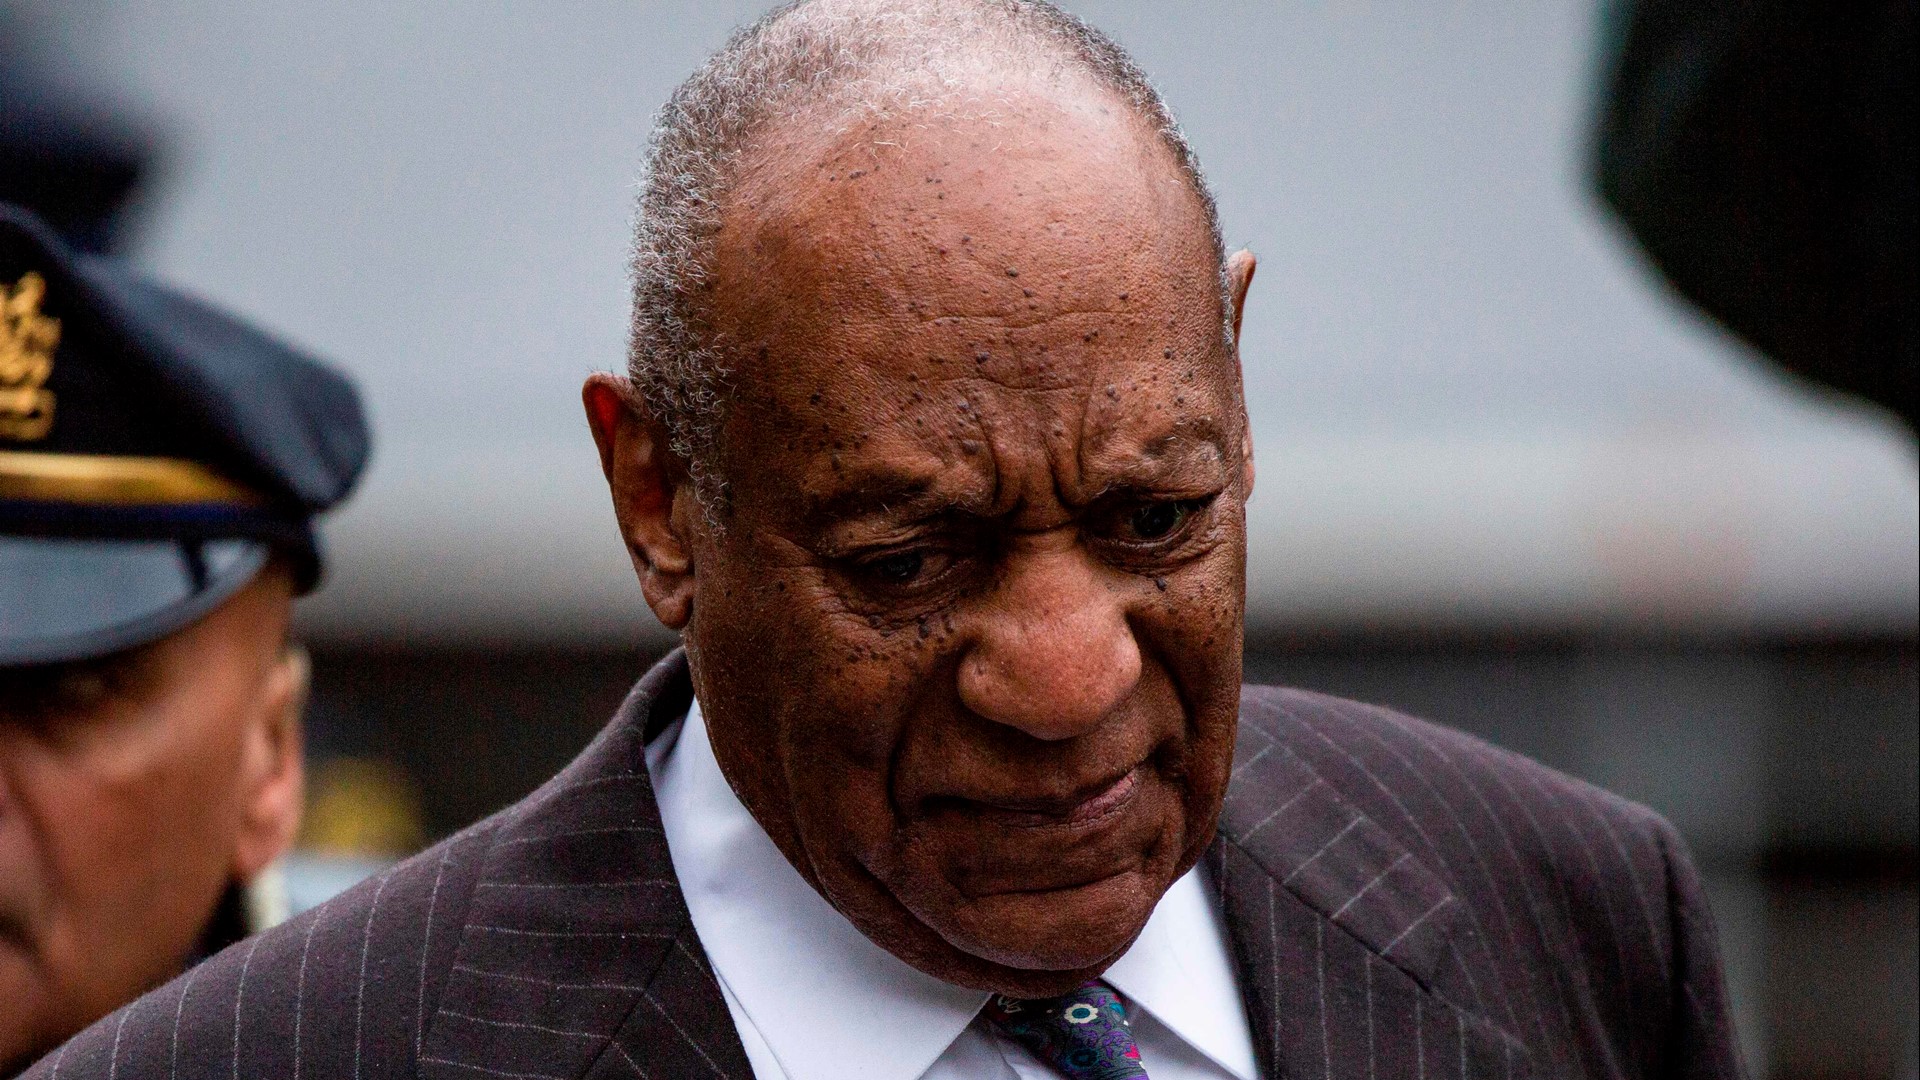 Cosby, 83, is a free man after the Pennsylvania State Supreme Court issued an opinion to vacate his conviction.